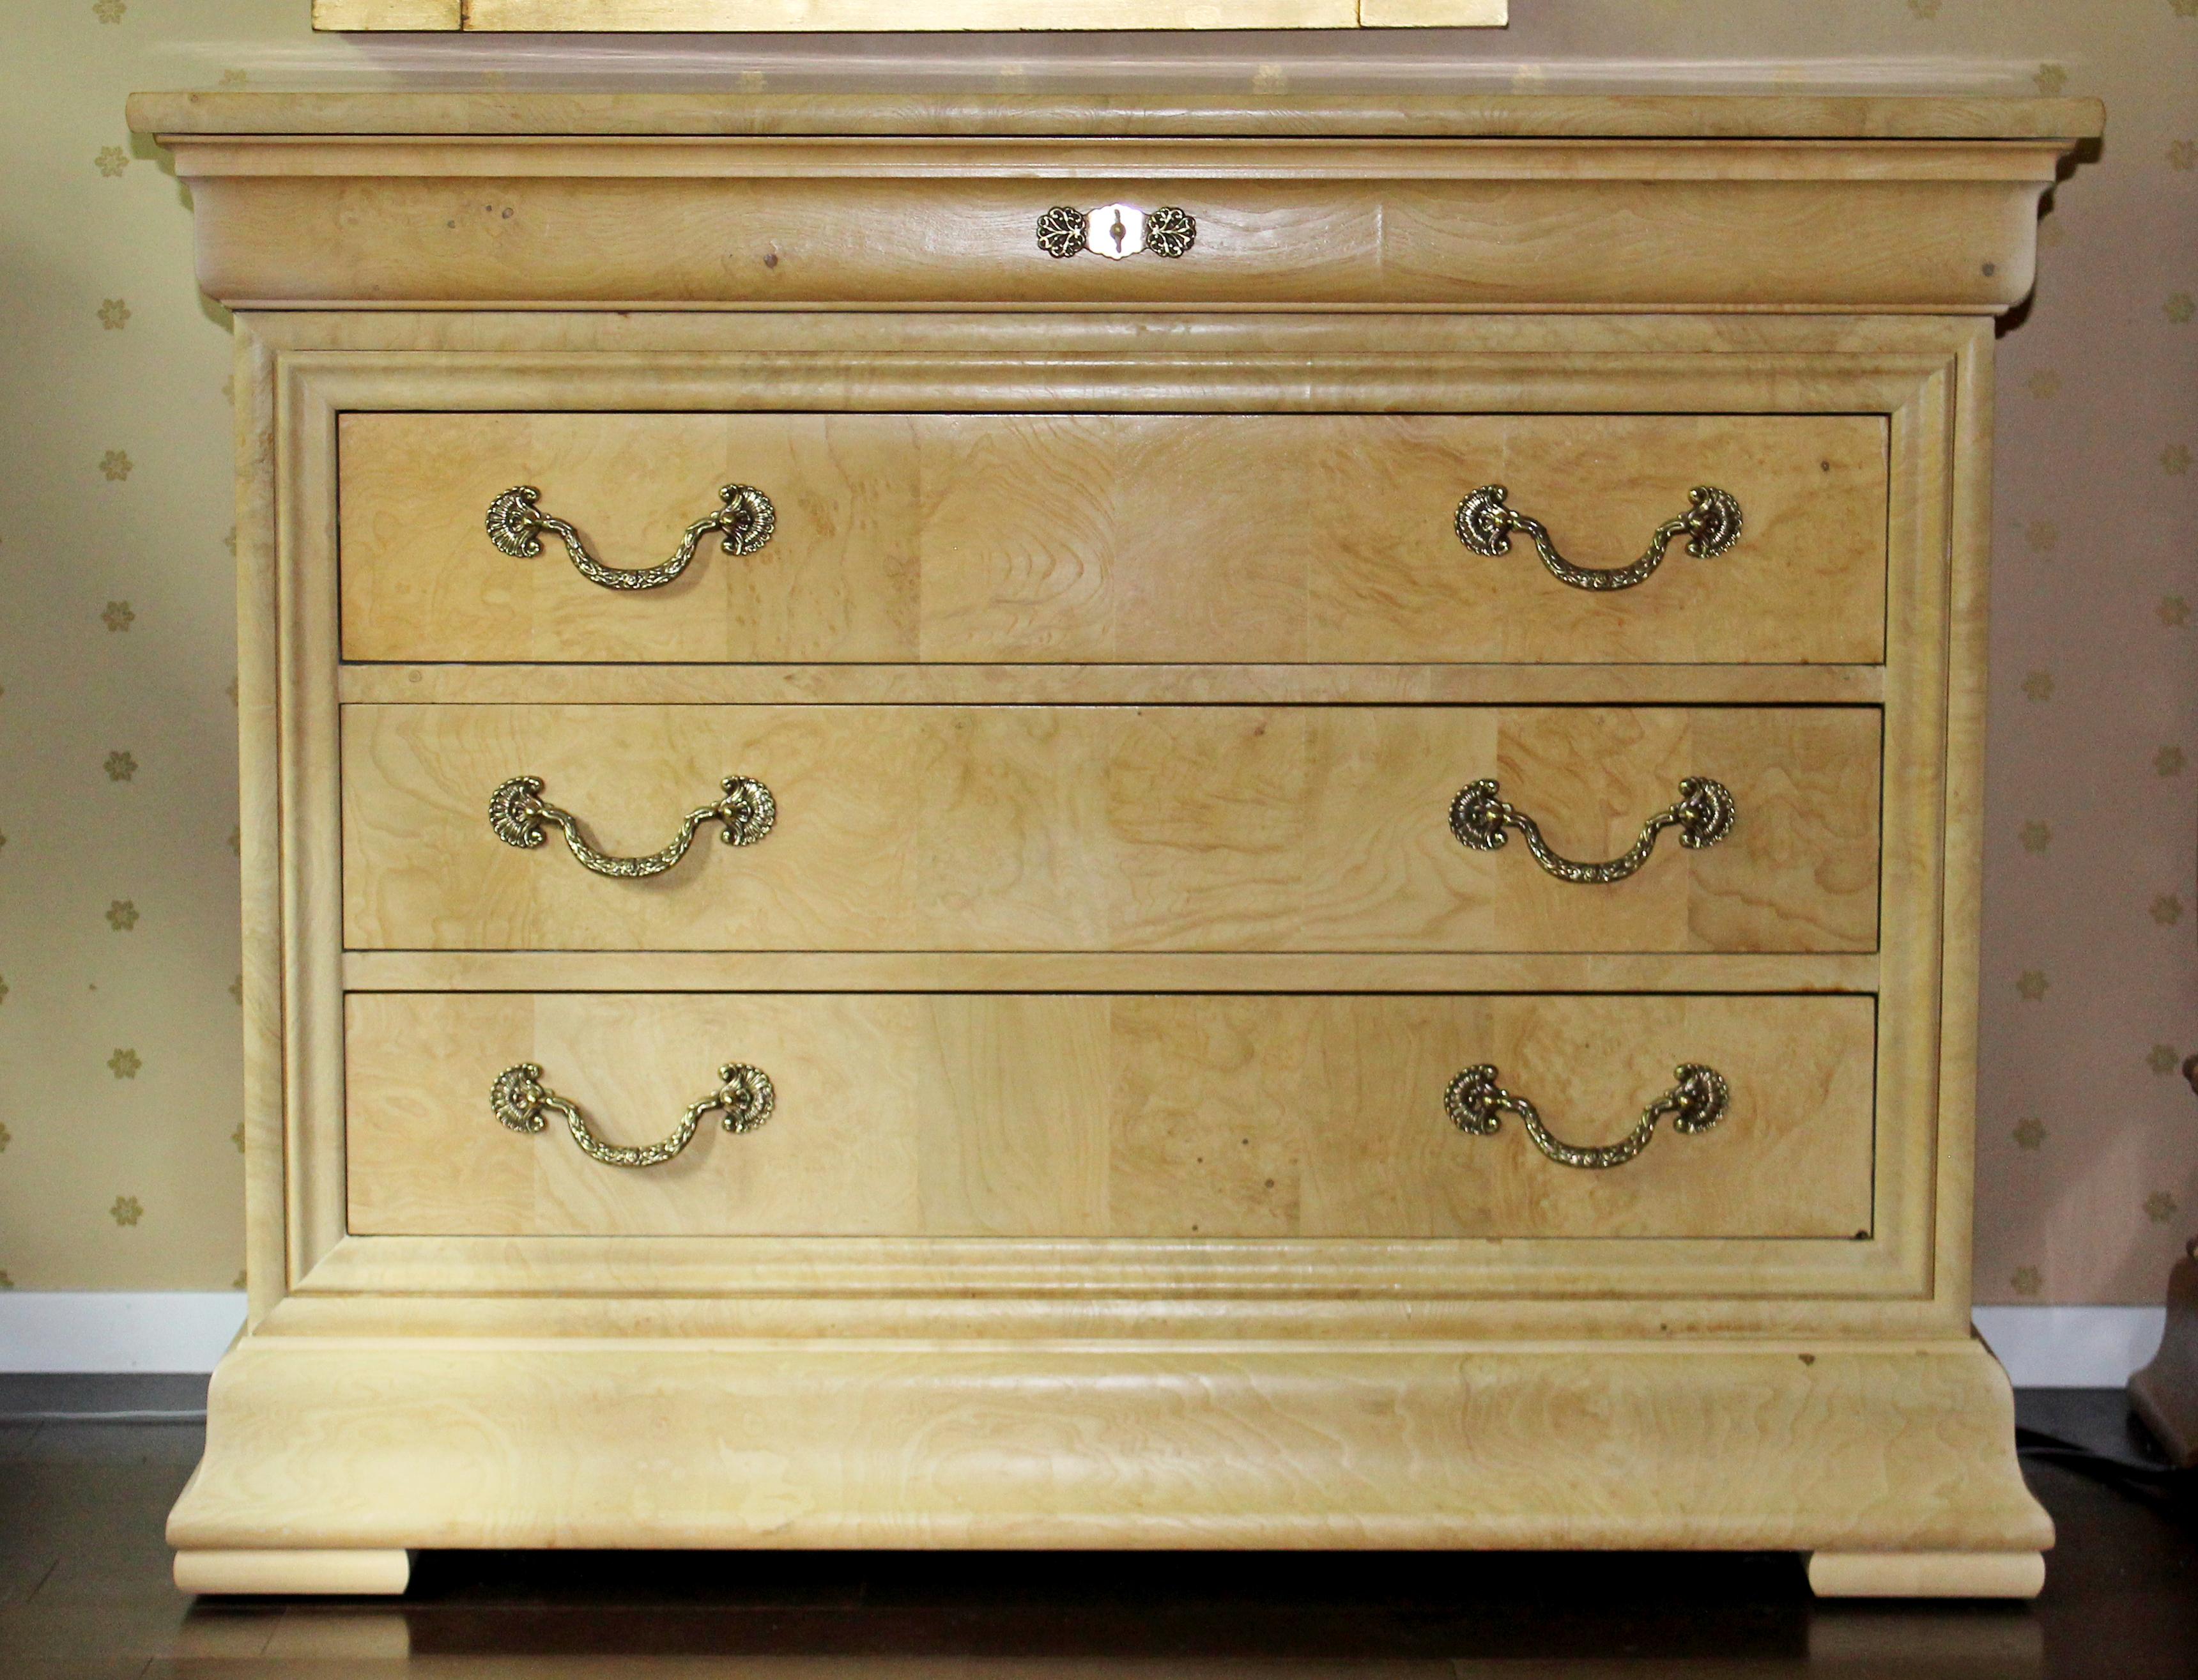 For your consideration is a gorgeous light burl wood dresser nightstand, with three drawers that have brass handles, in the style of Henredon. In excellent condition. The dimensions are 44